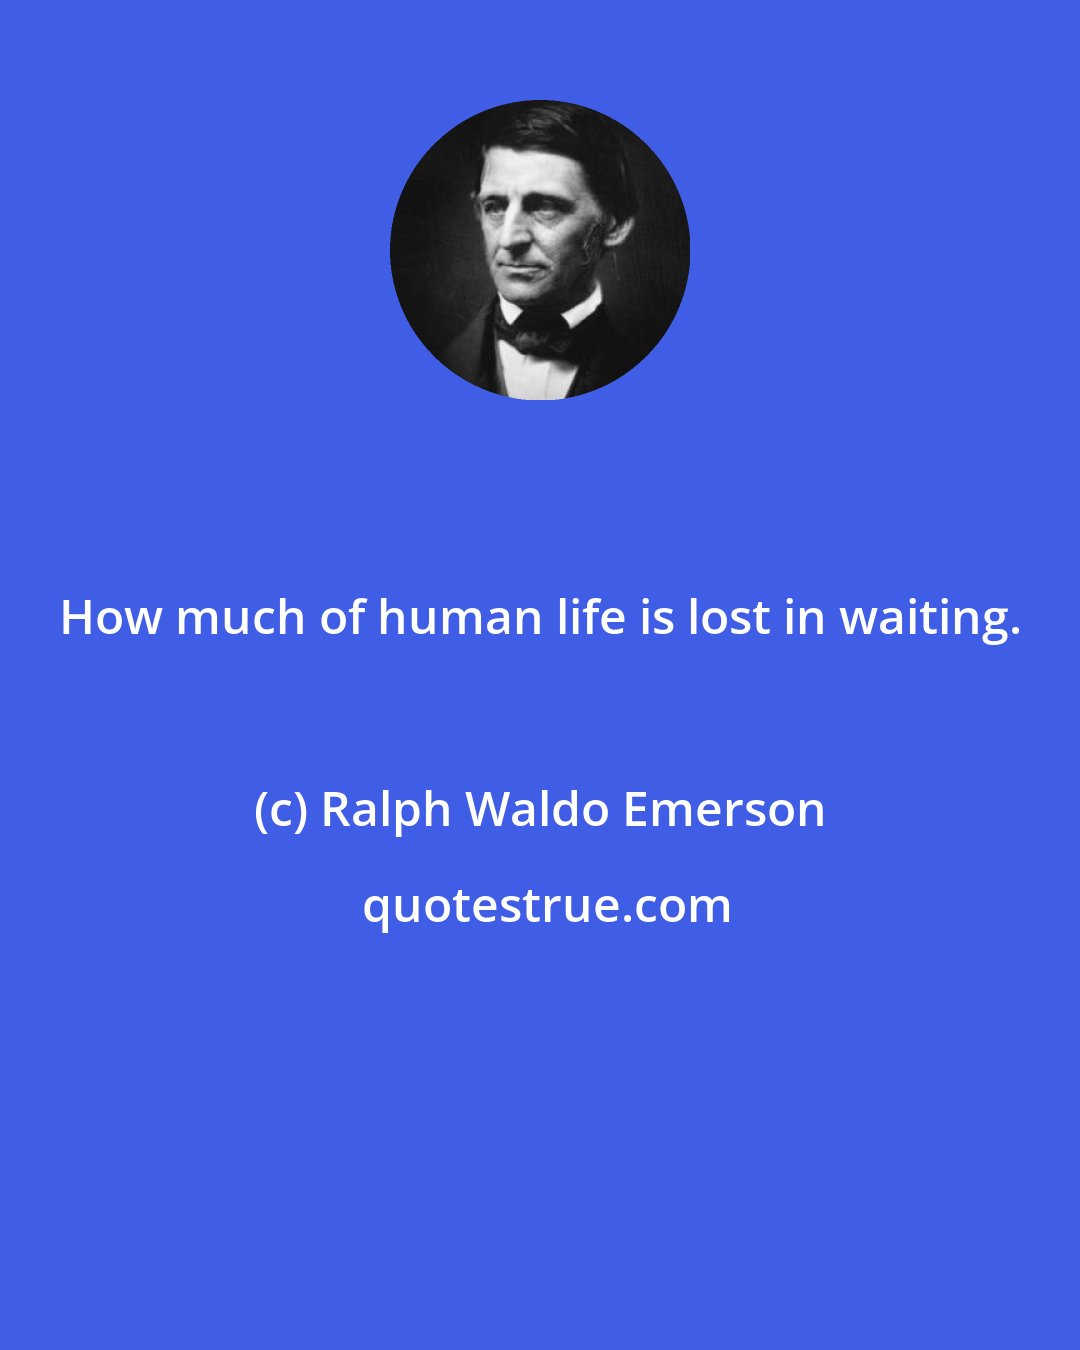 Ralph Waldo Emerson: How much of human life is lost in waiting.